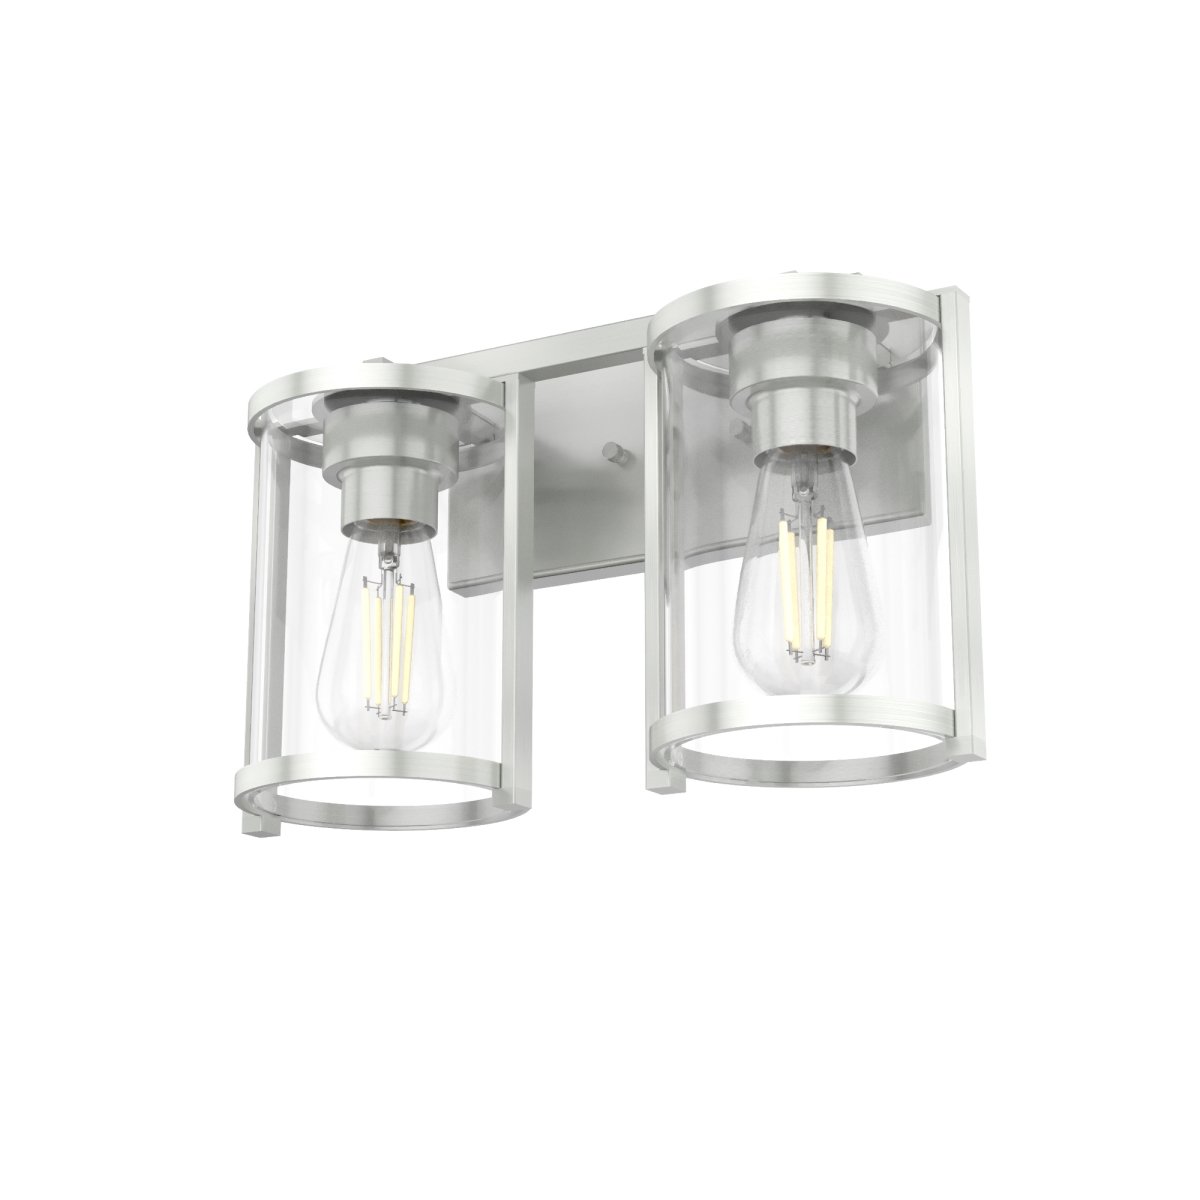 Picture of Hunter 48002 10.25 in. Astwood Brushed Nickel with Clear Glass 2 Light Bathroom Vanity Wall Light Fixture